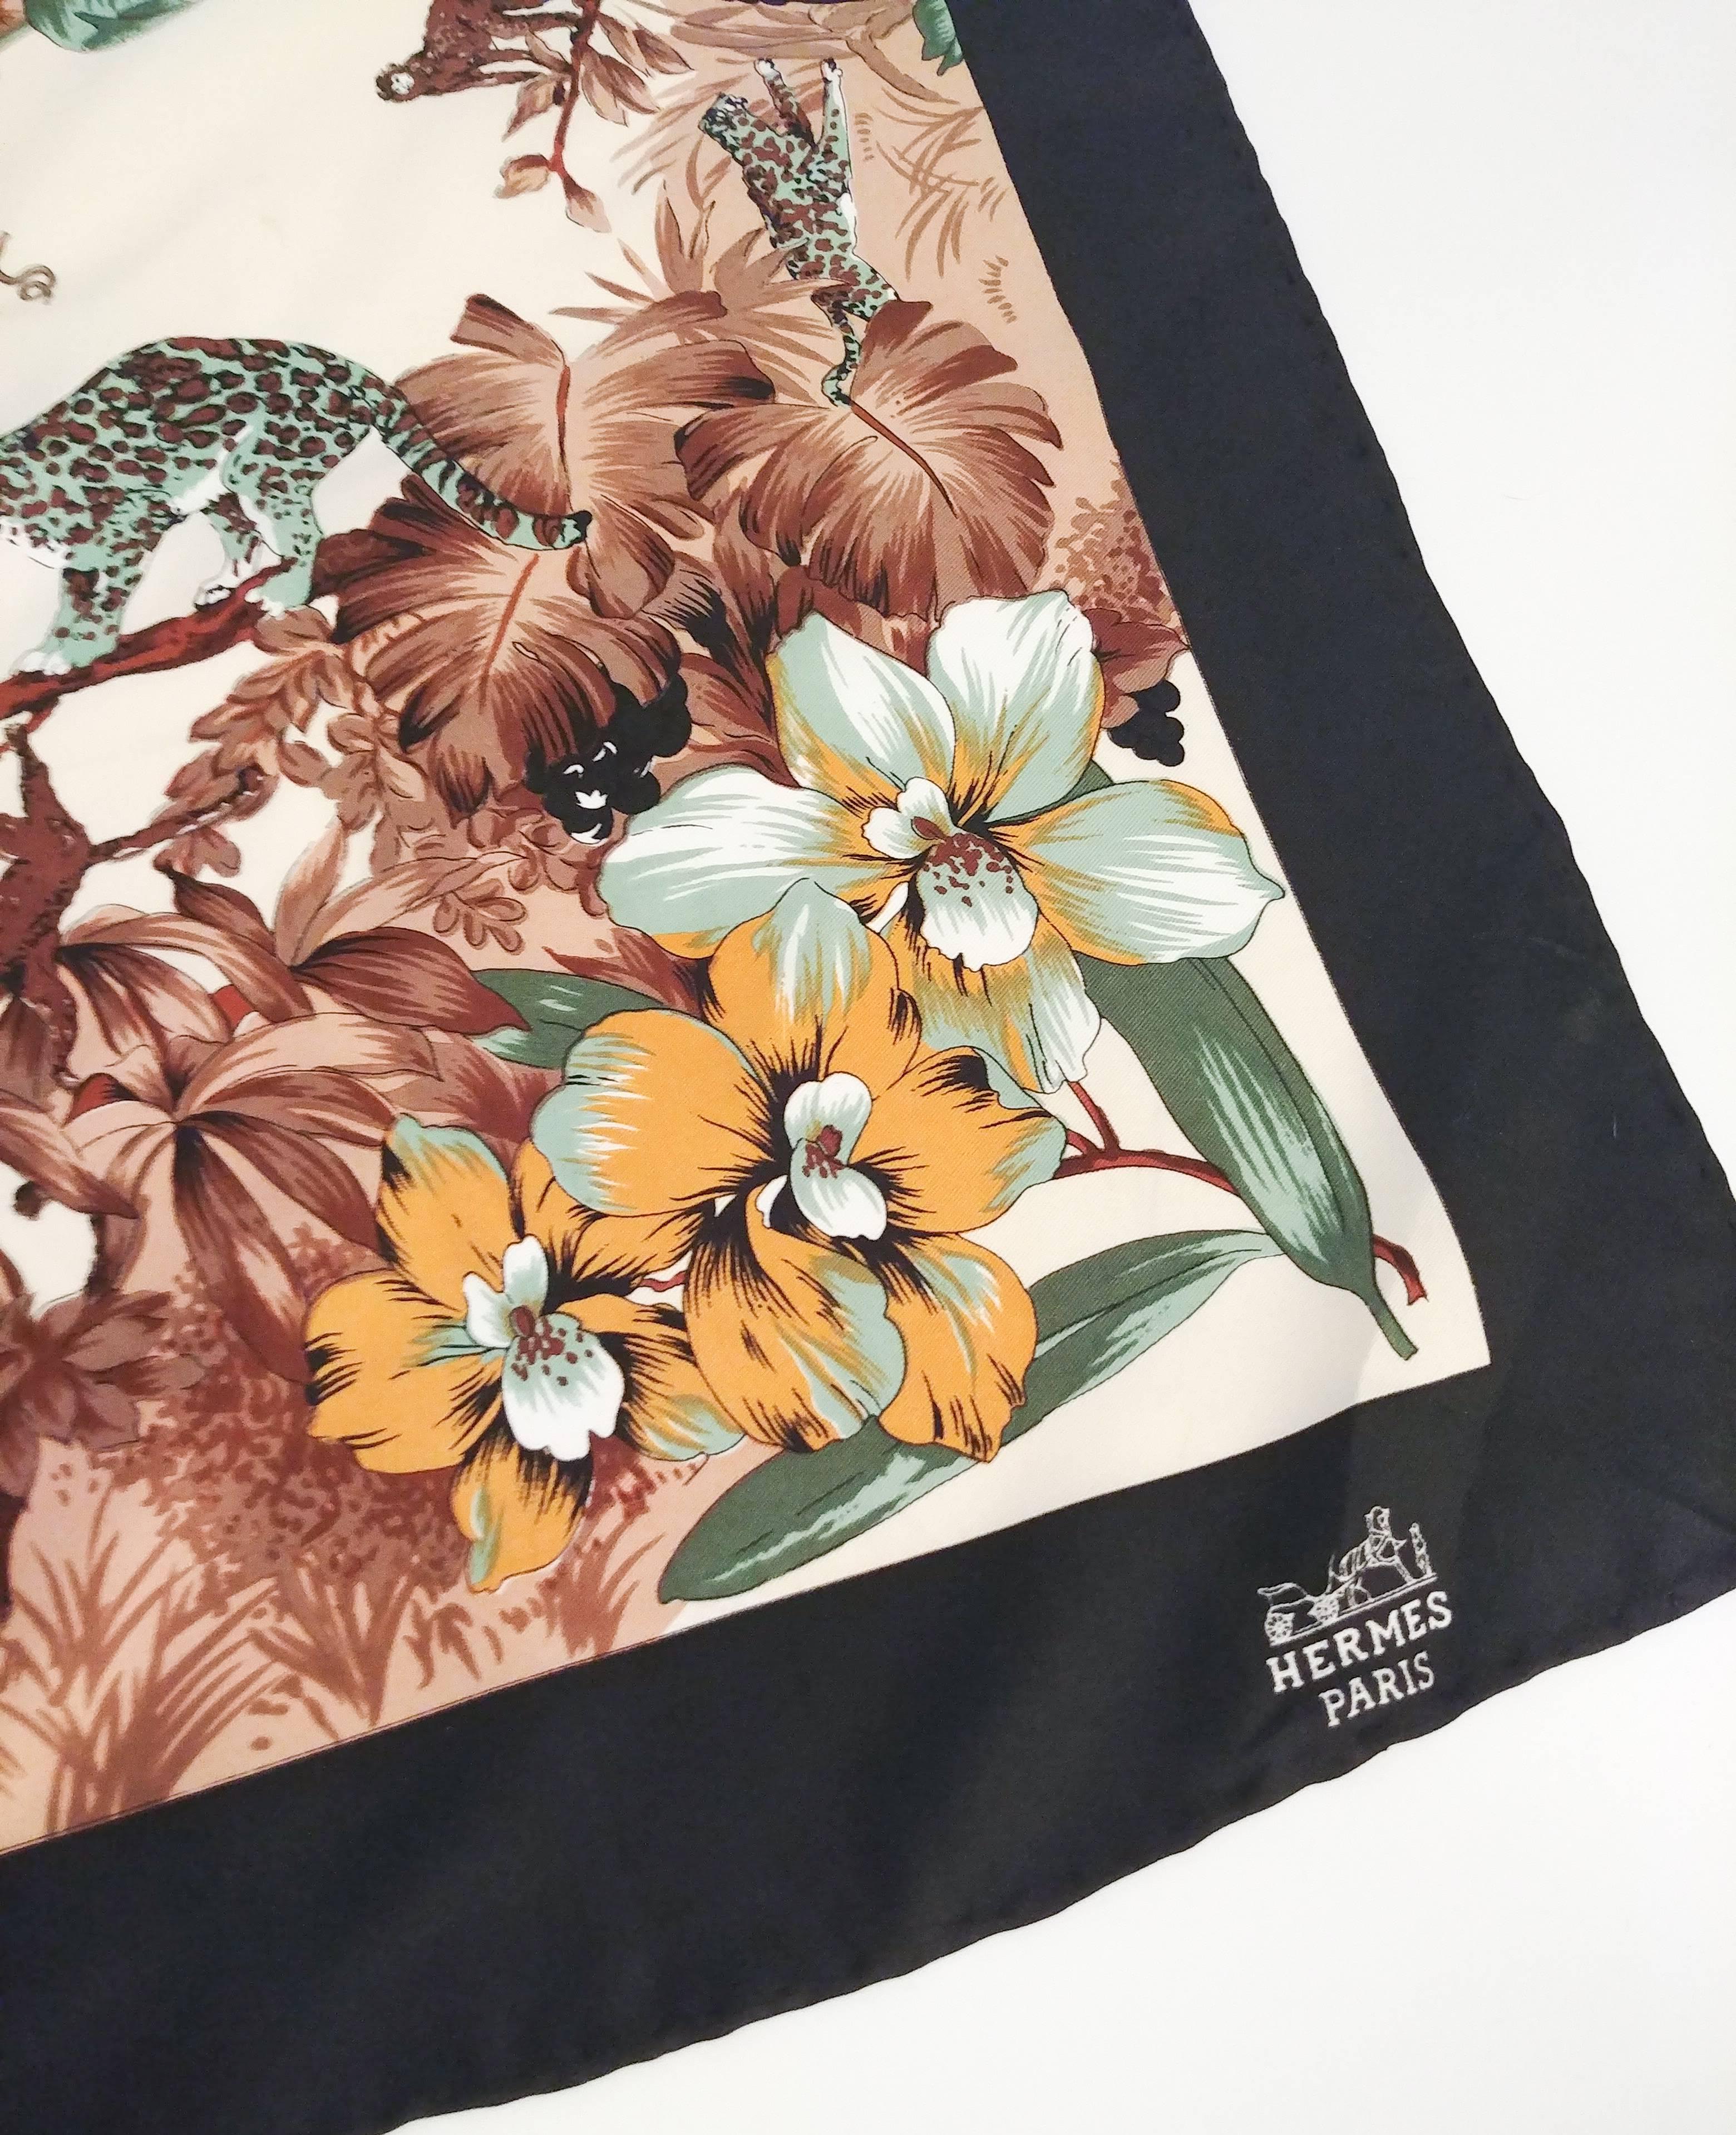 Hermes Tiger & Florals Circle of Life Silk Print Scarf. Hand rolled. 